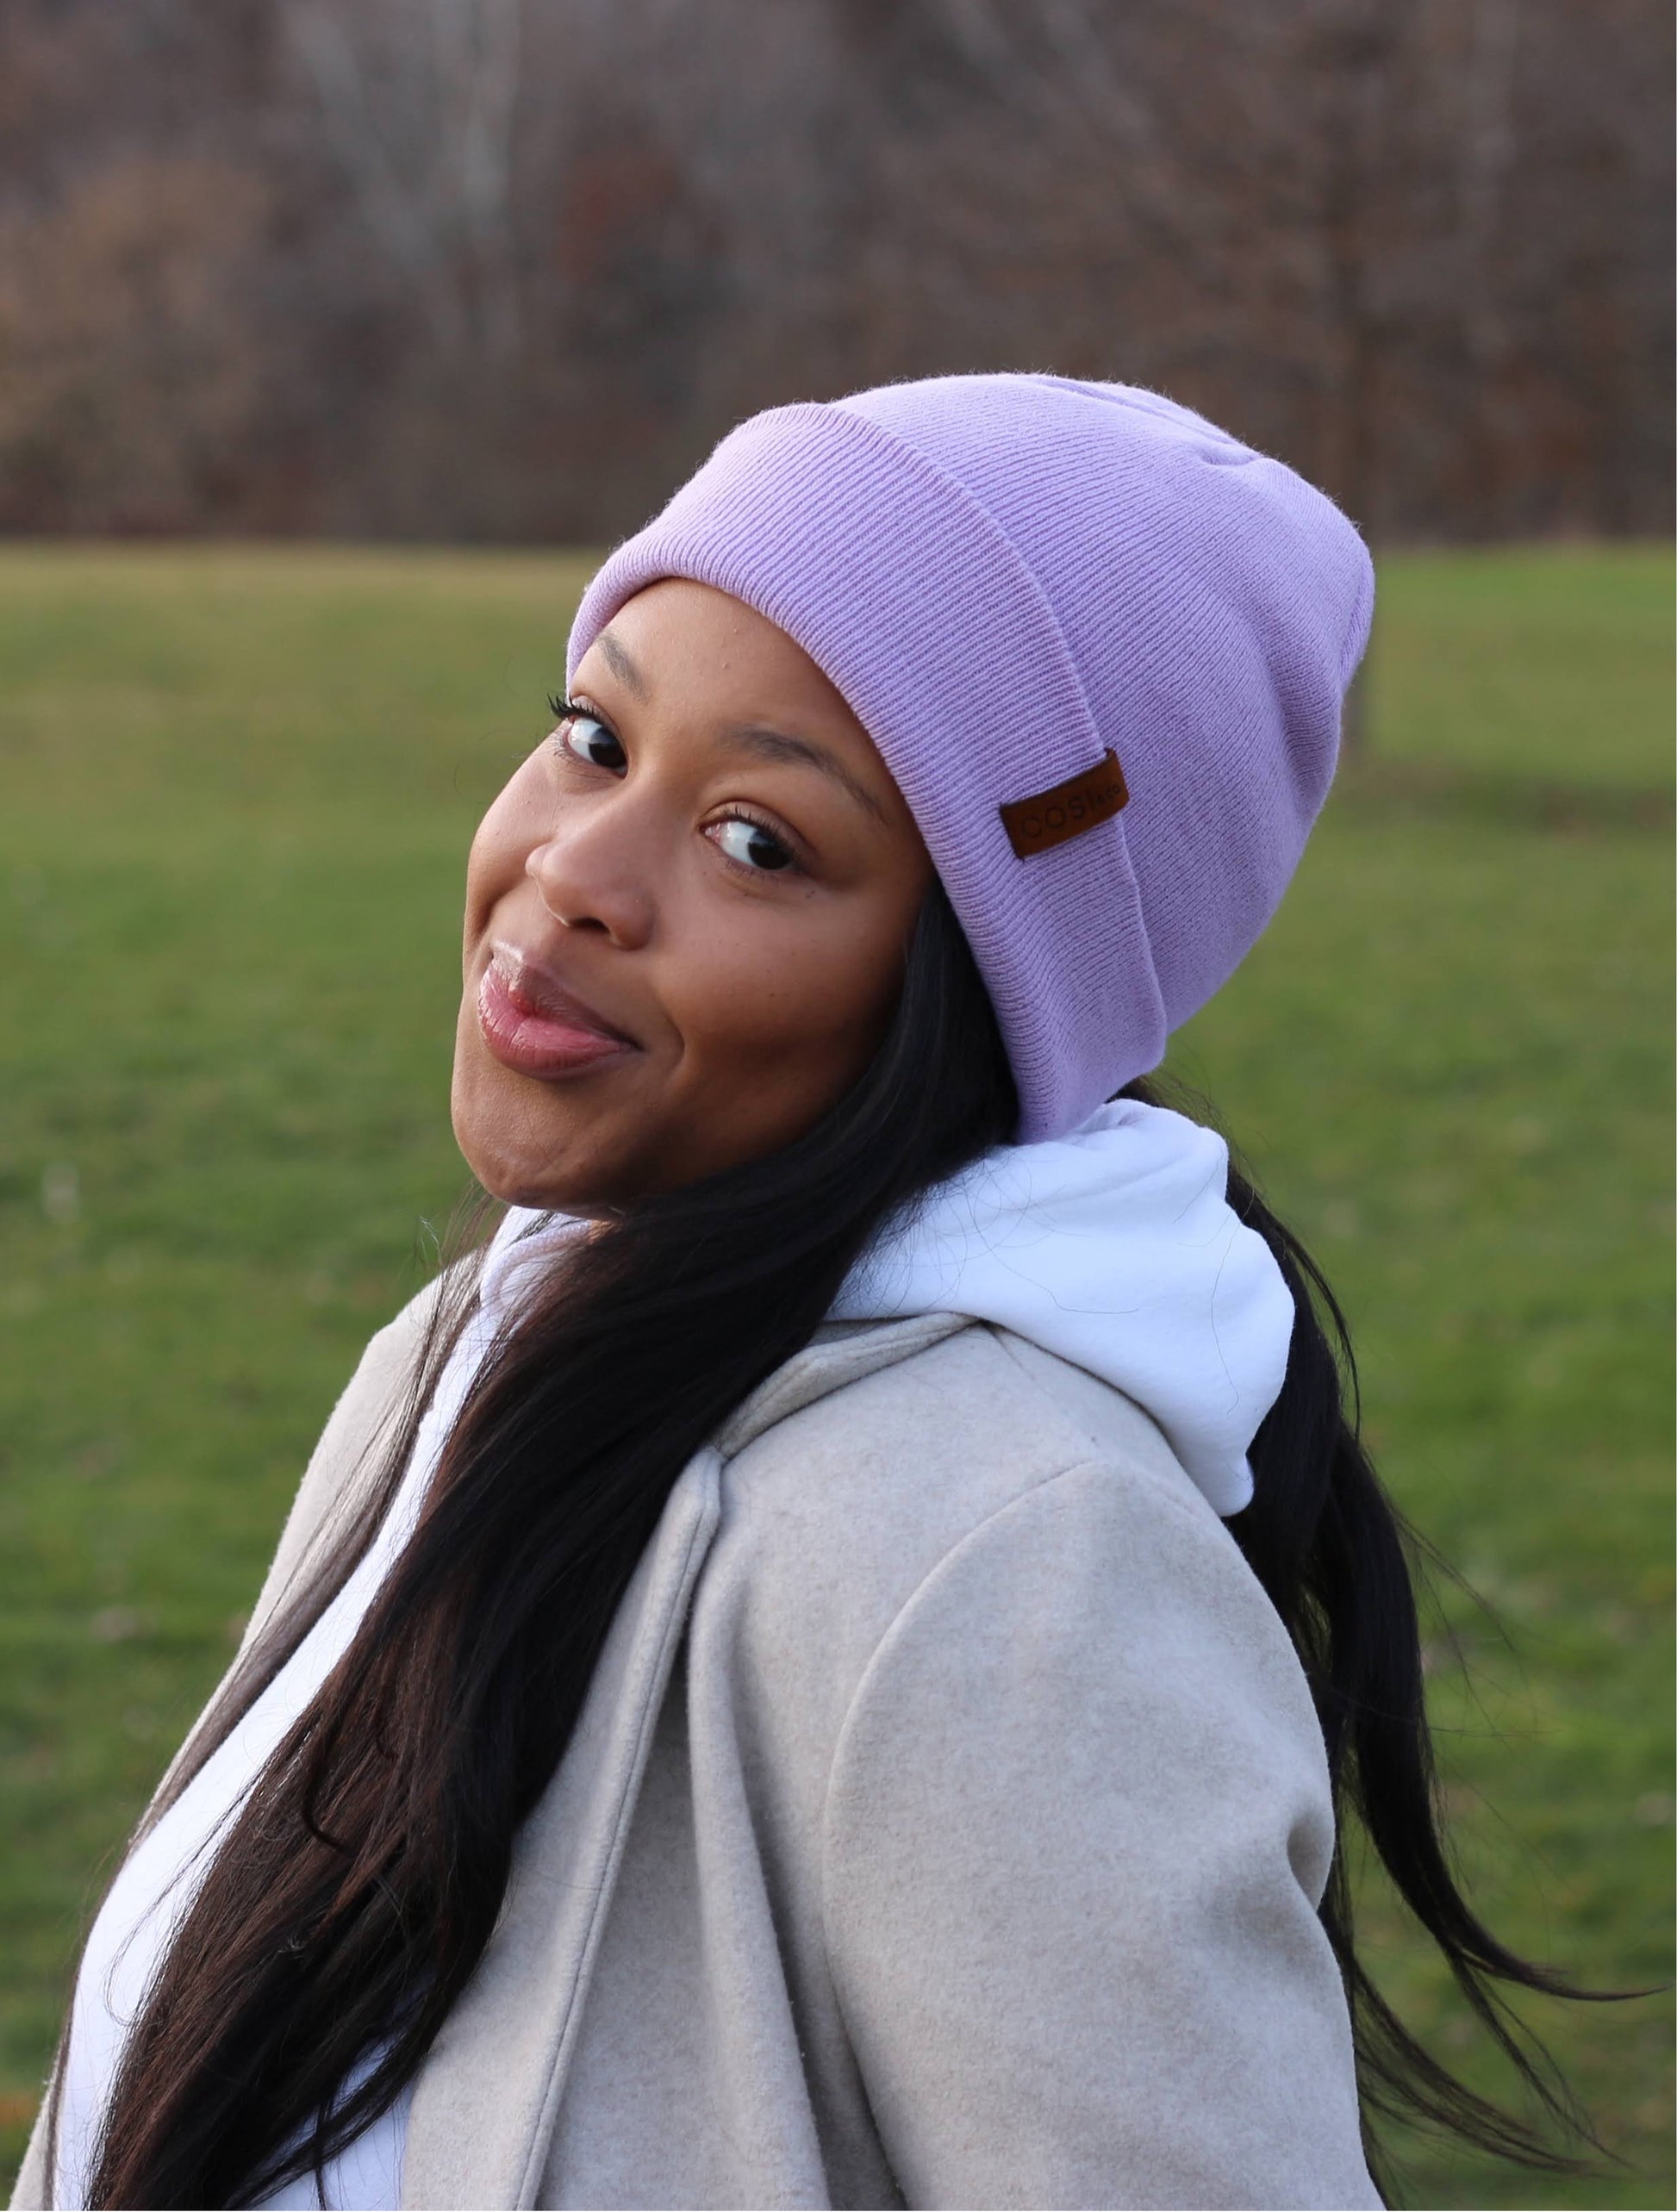 The Fit Beanie in Lavender - COSI & co.